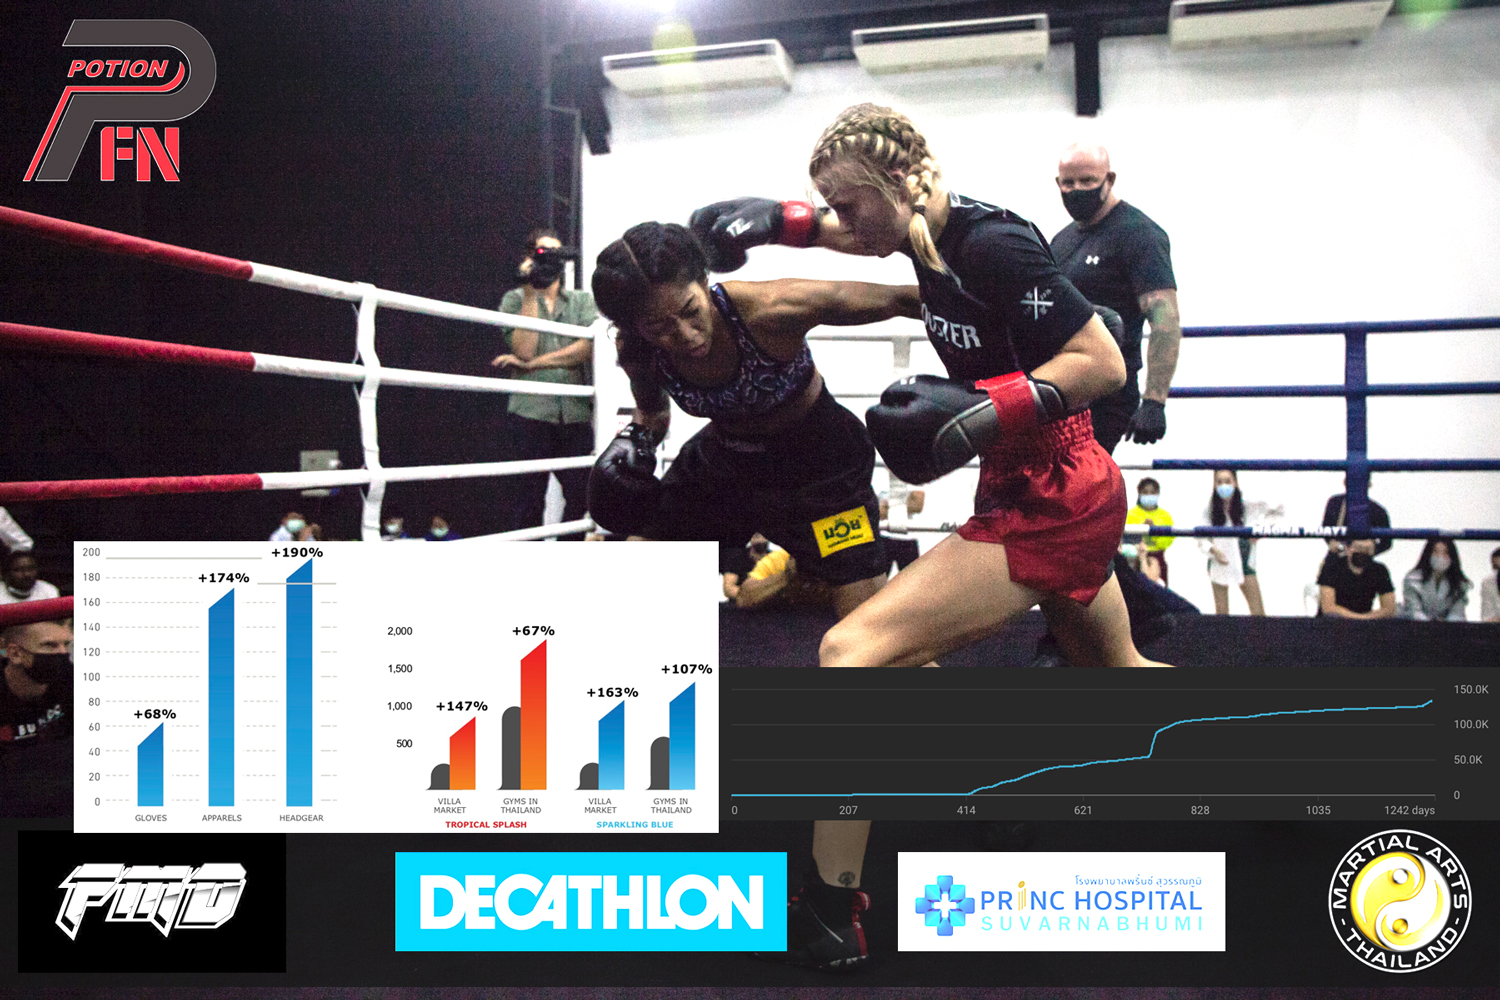 Advertising thumbnail with Marie Ruumet and Po Denman boxing and conversion charts in overlay